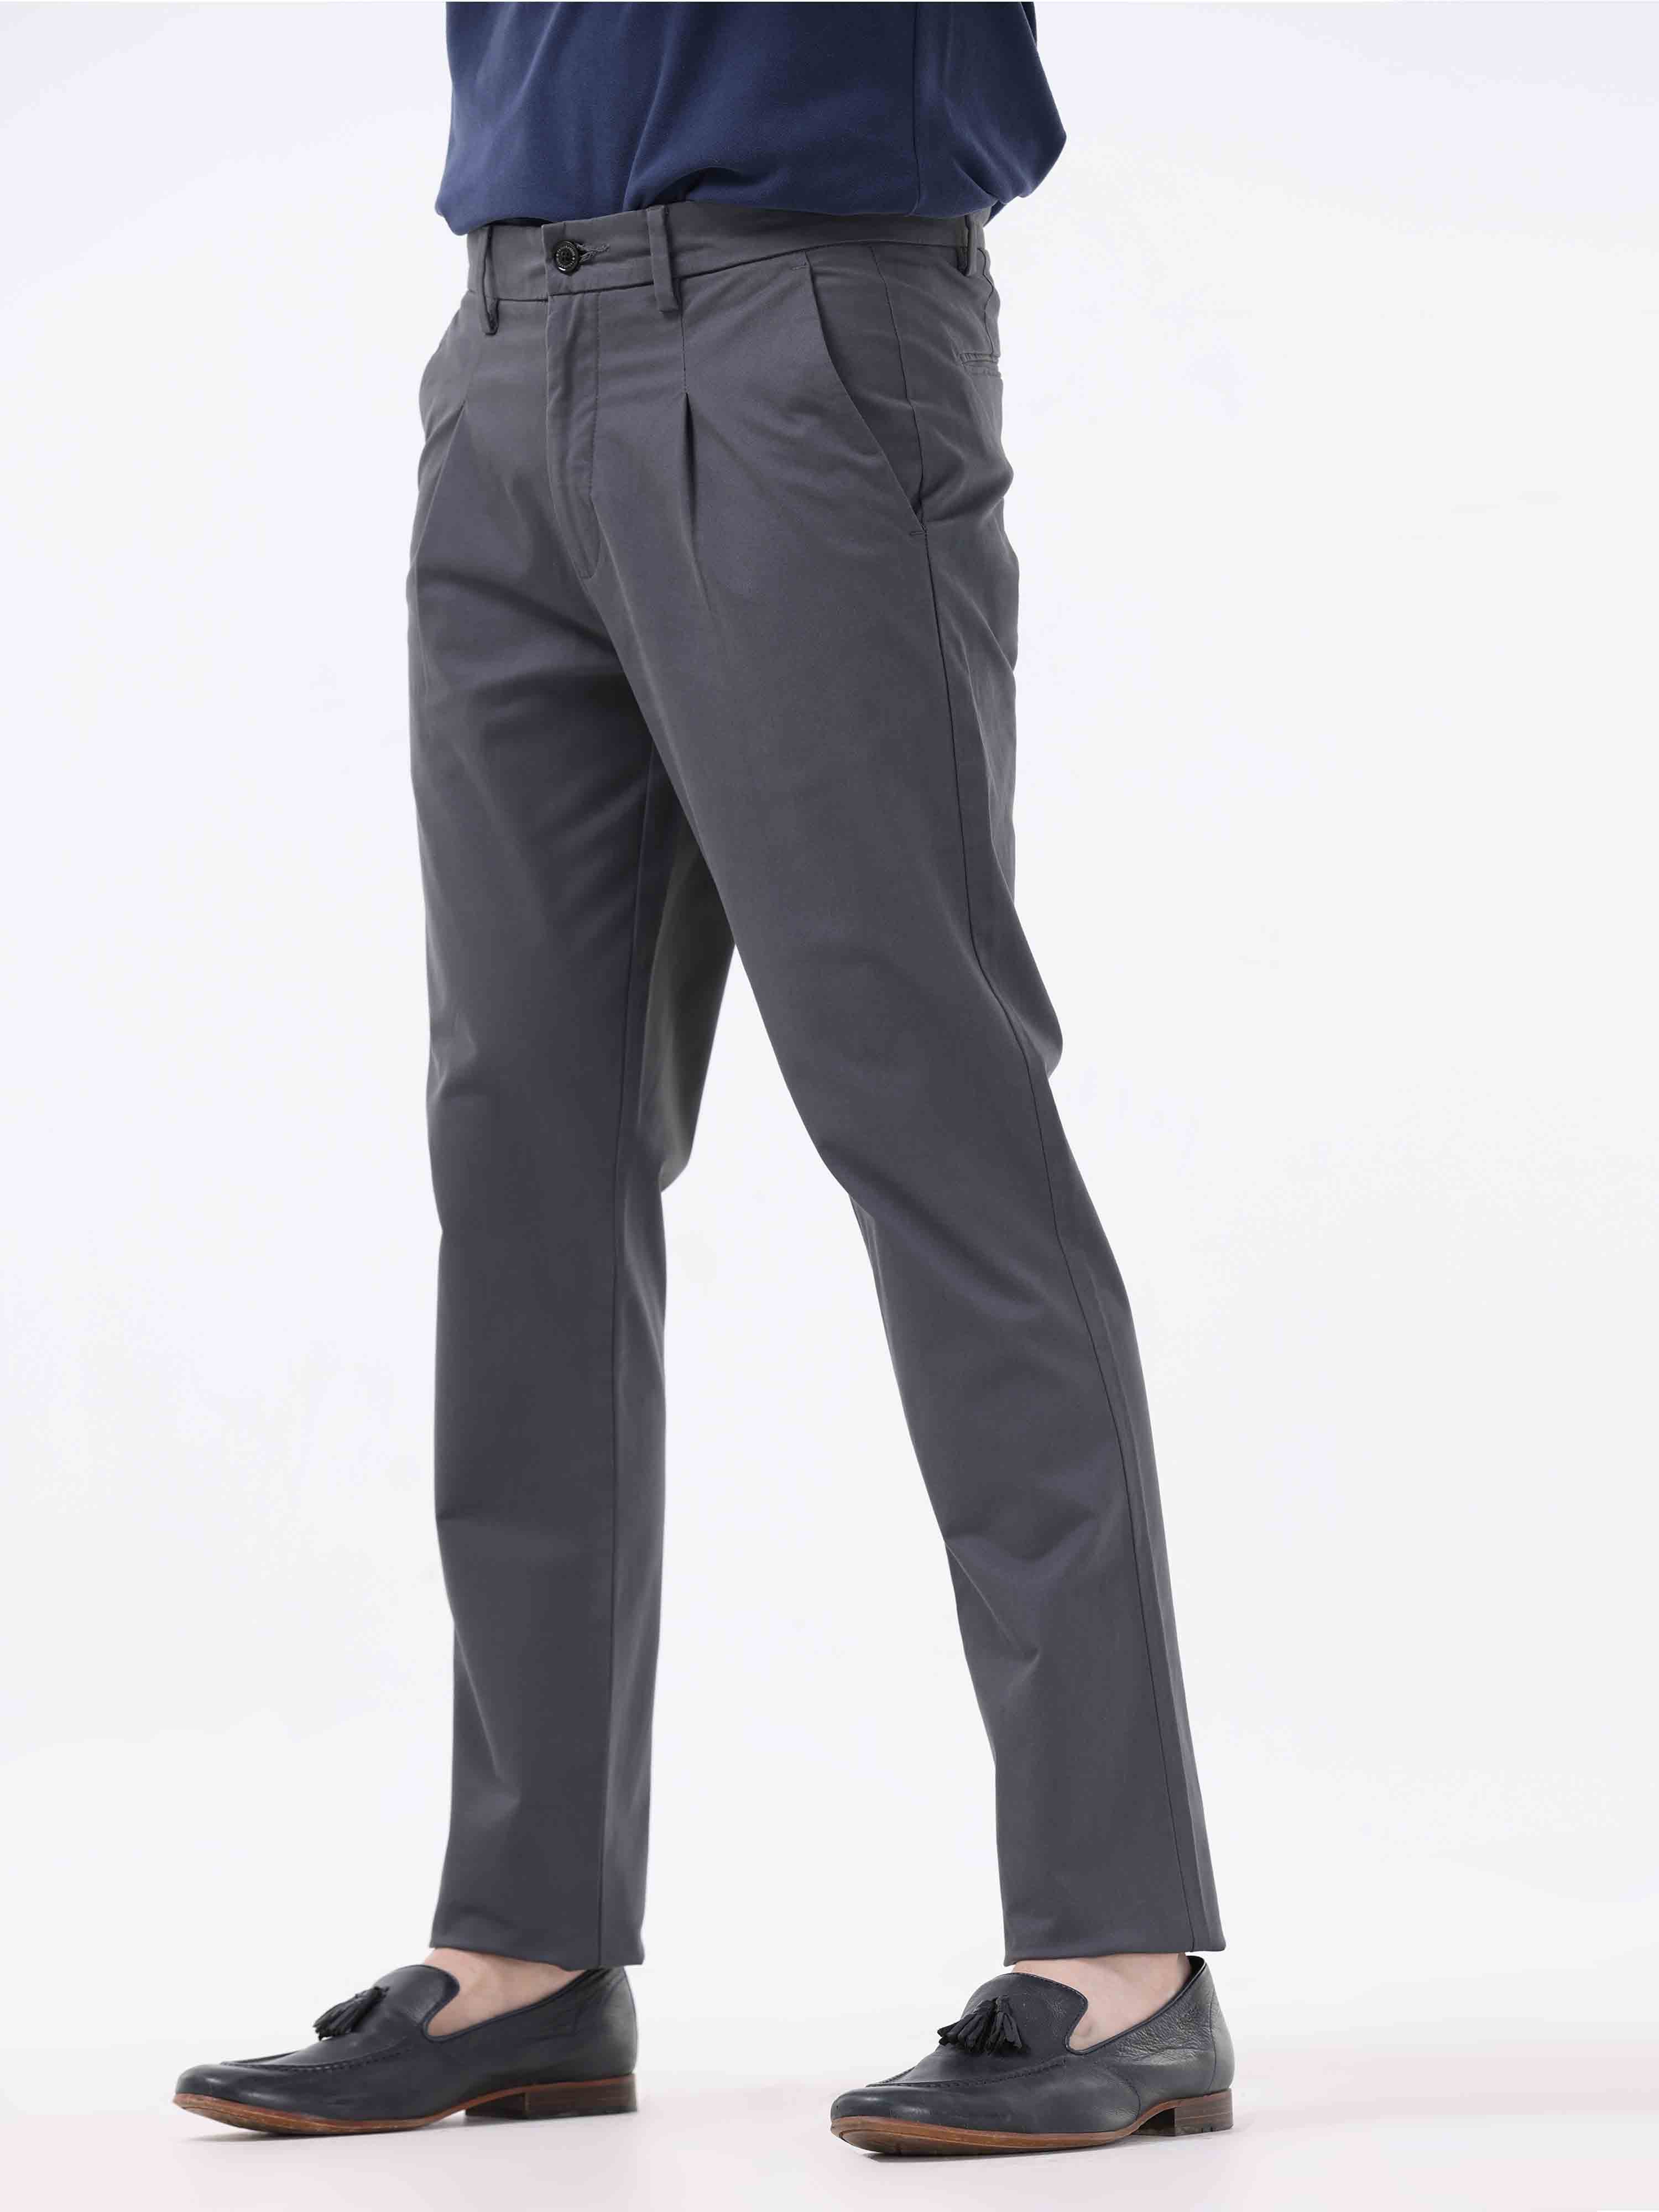 buy quality chinos and trouser at affordable rate on hulkma,